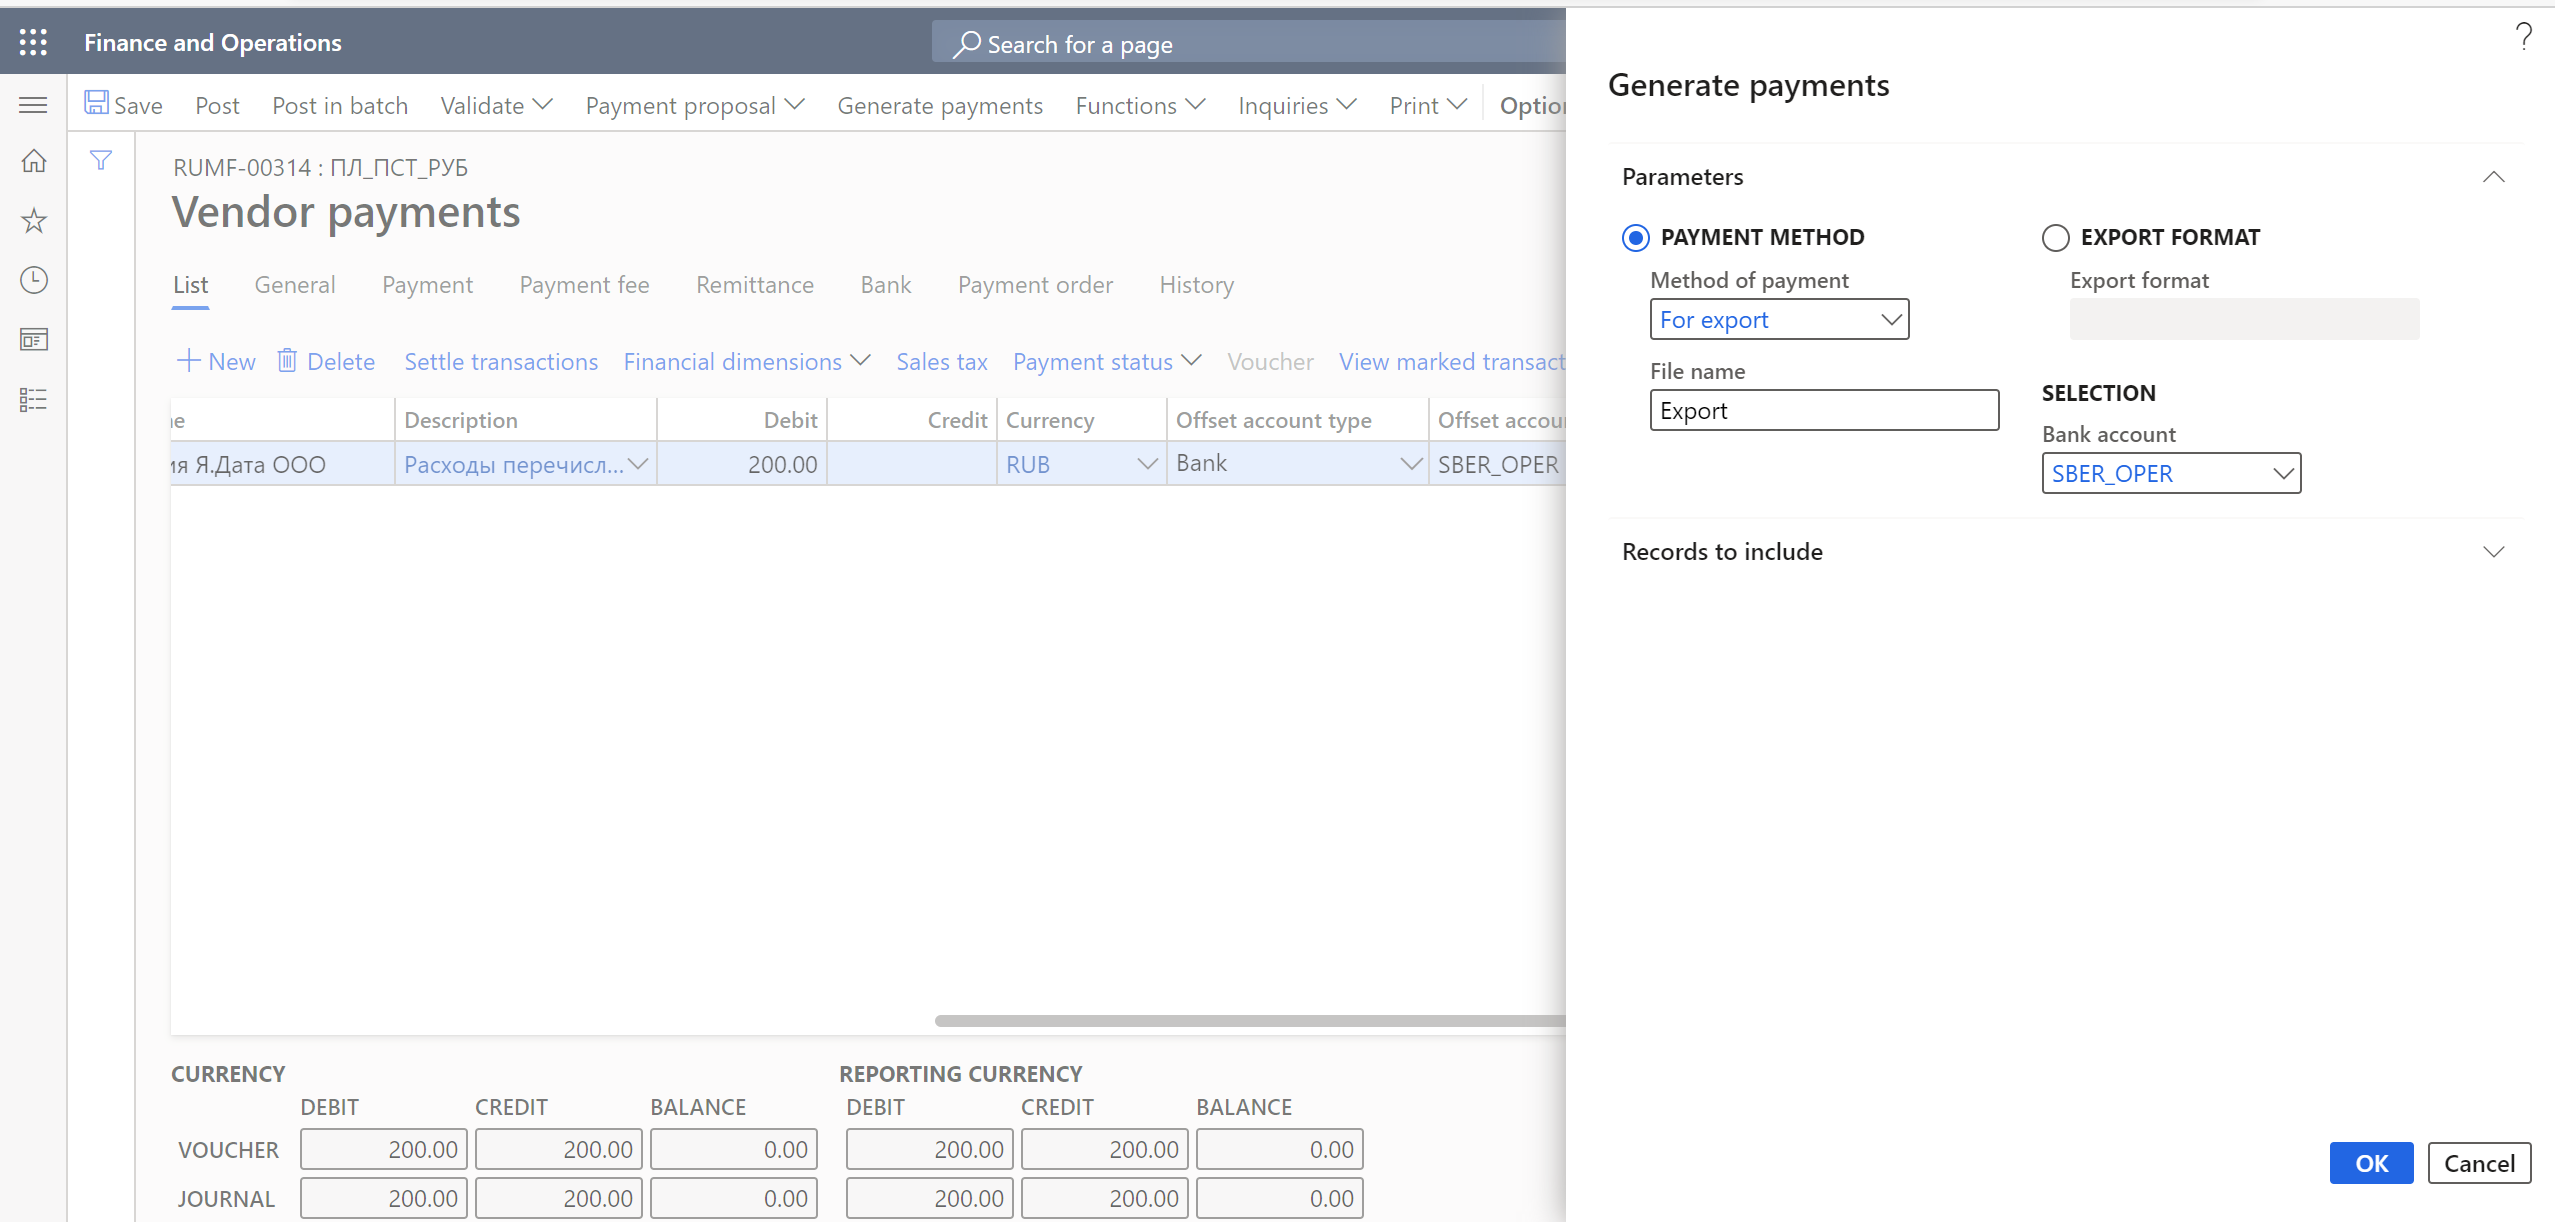 Settings in the Generate payments dialog box.